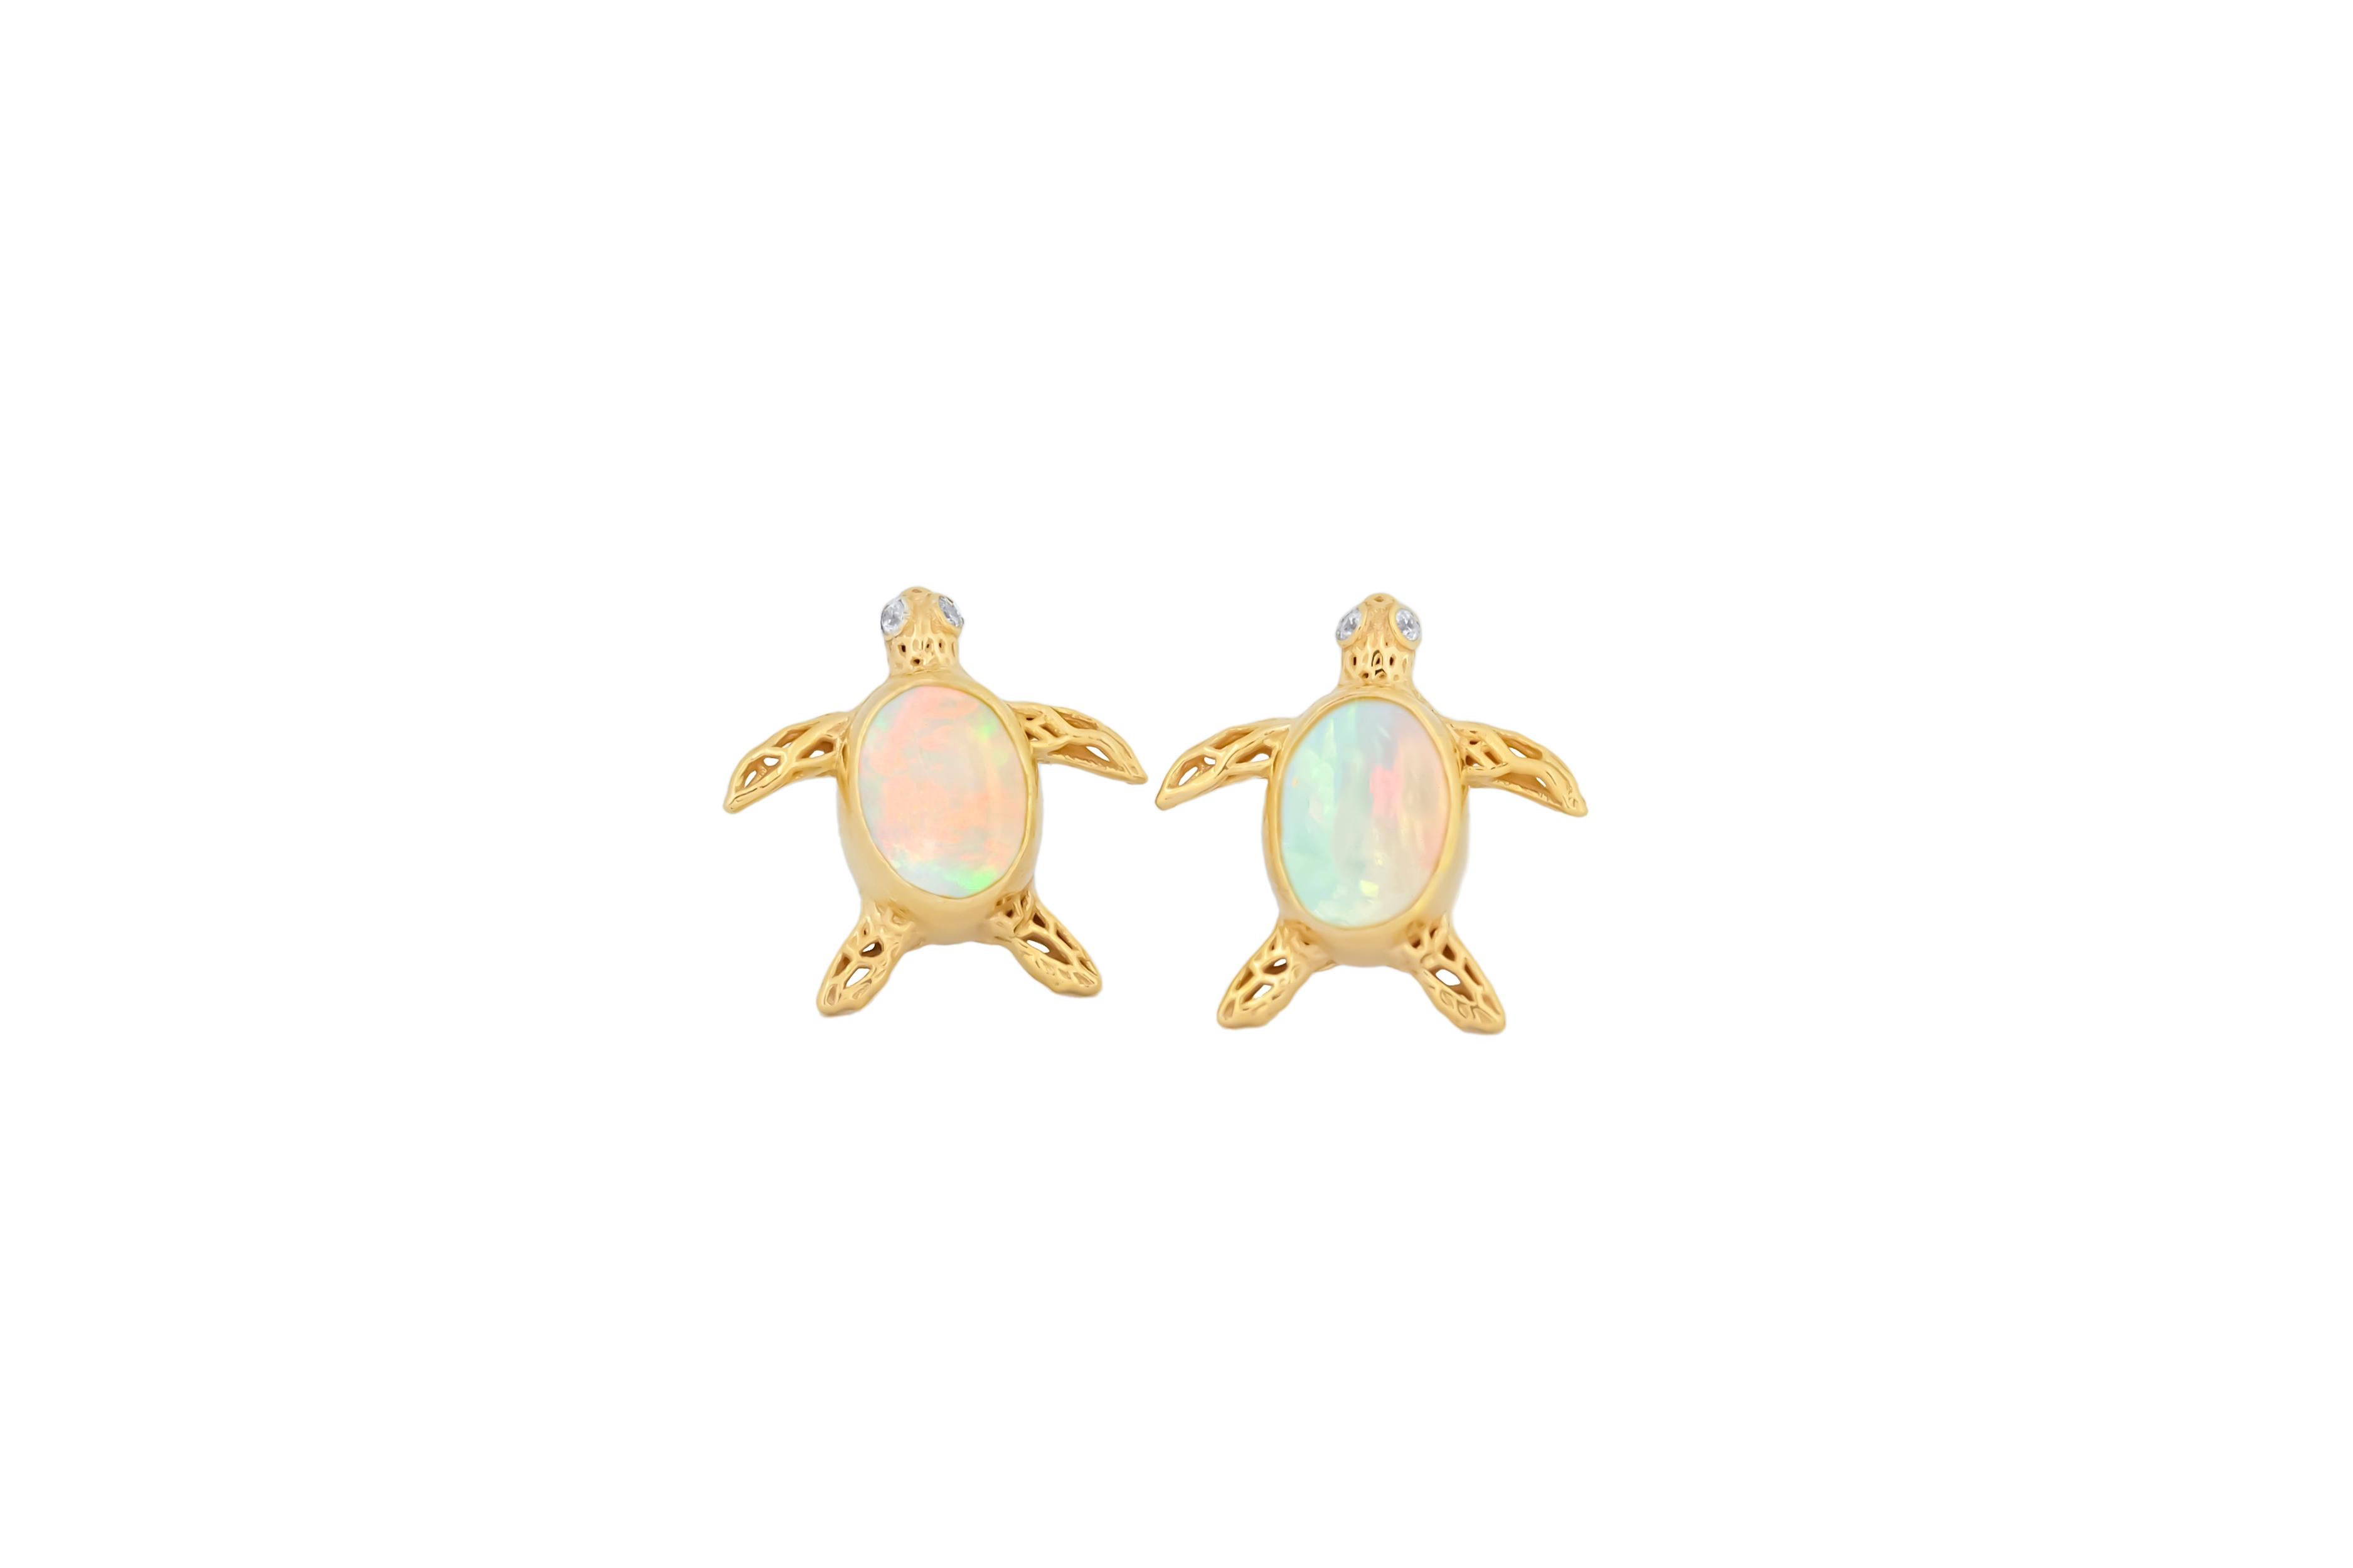 Cabochon Turtle earrings studs with opals in 14k gold.